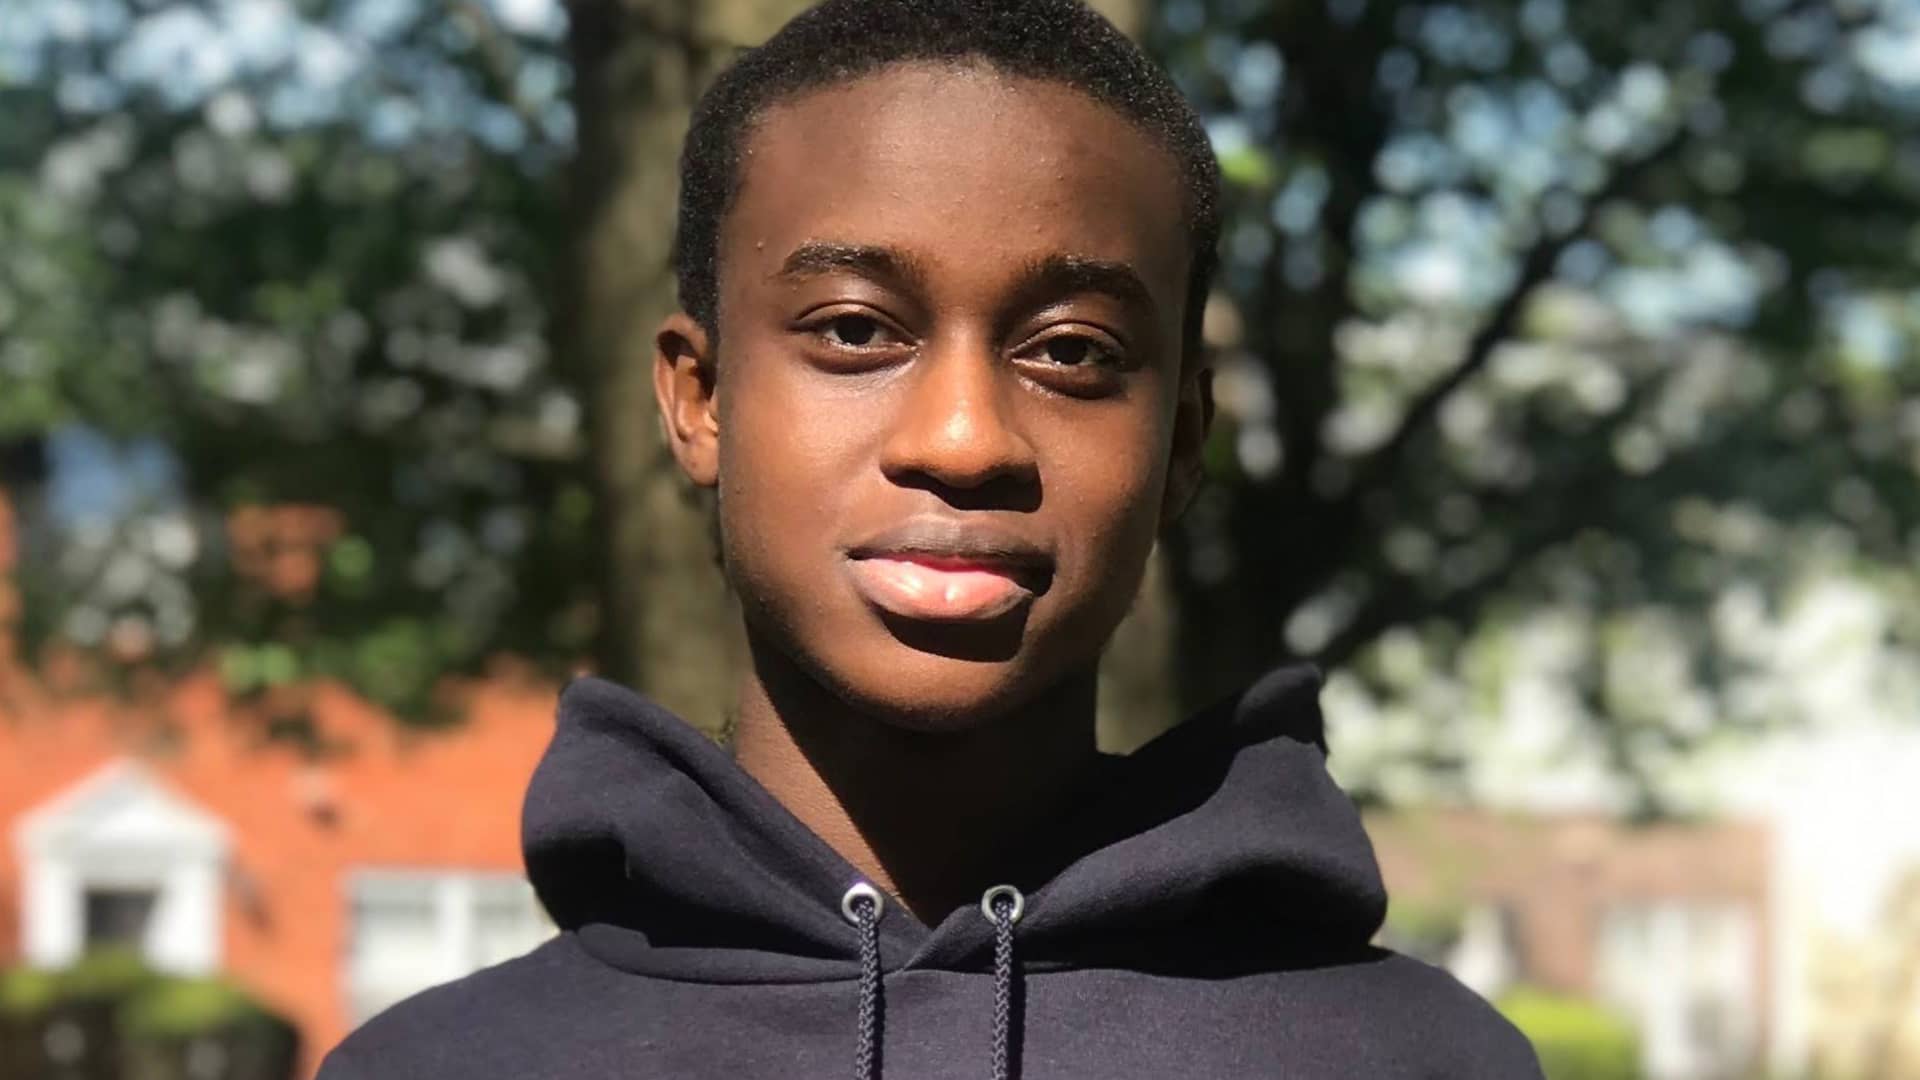 Alhassan Bangura, 18, is a recent high school graduate from Windsor Mill, Maryland